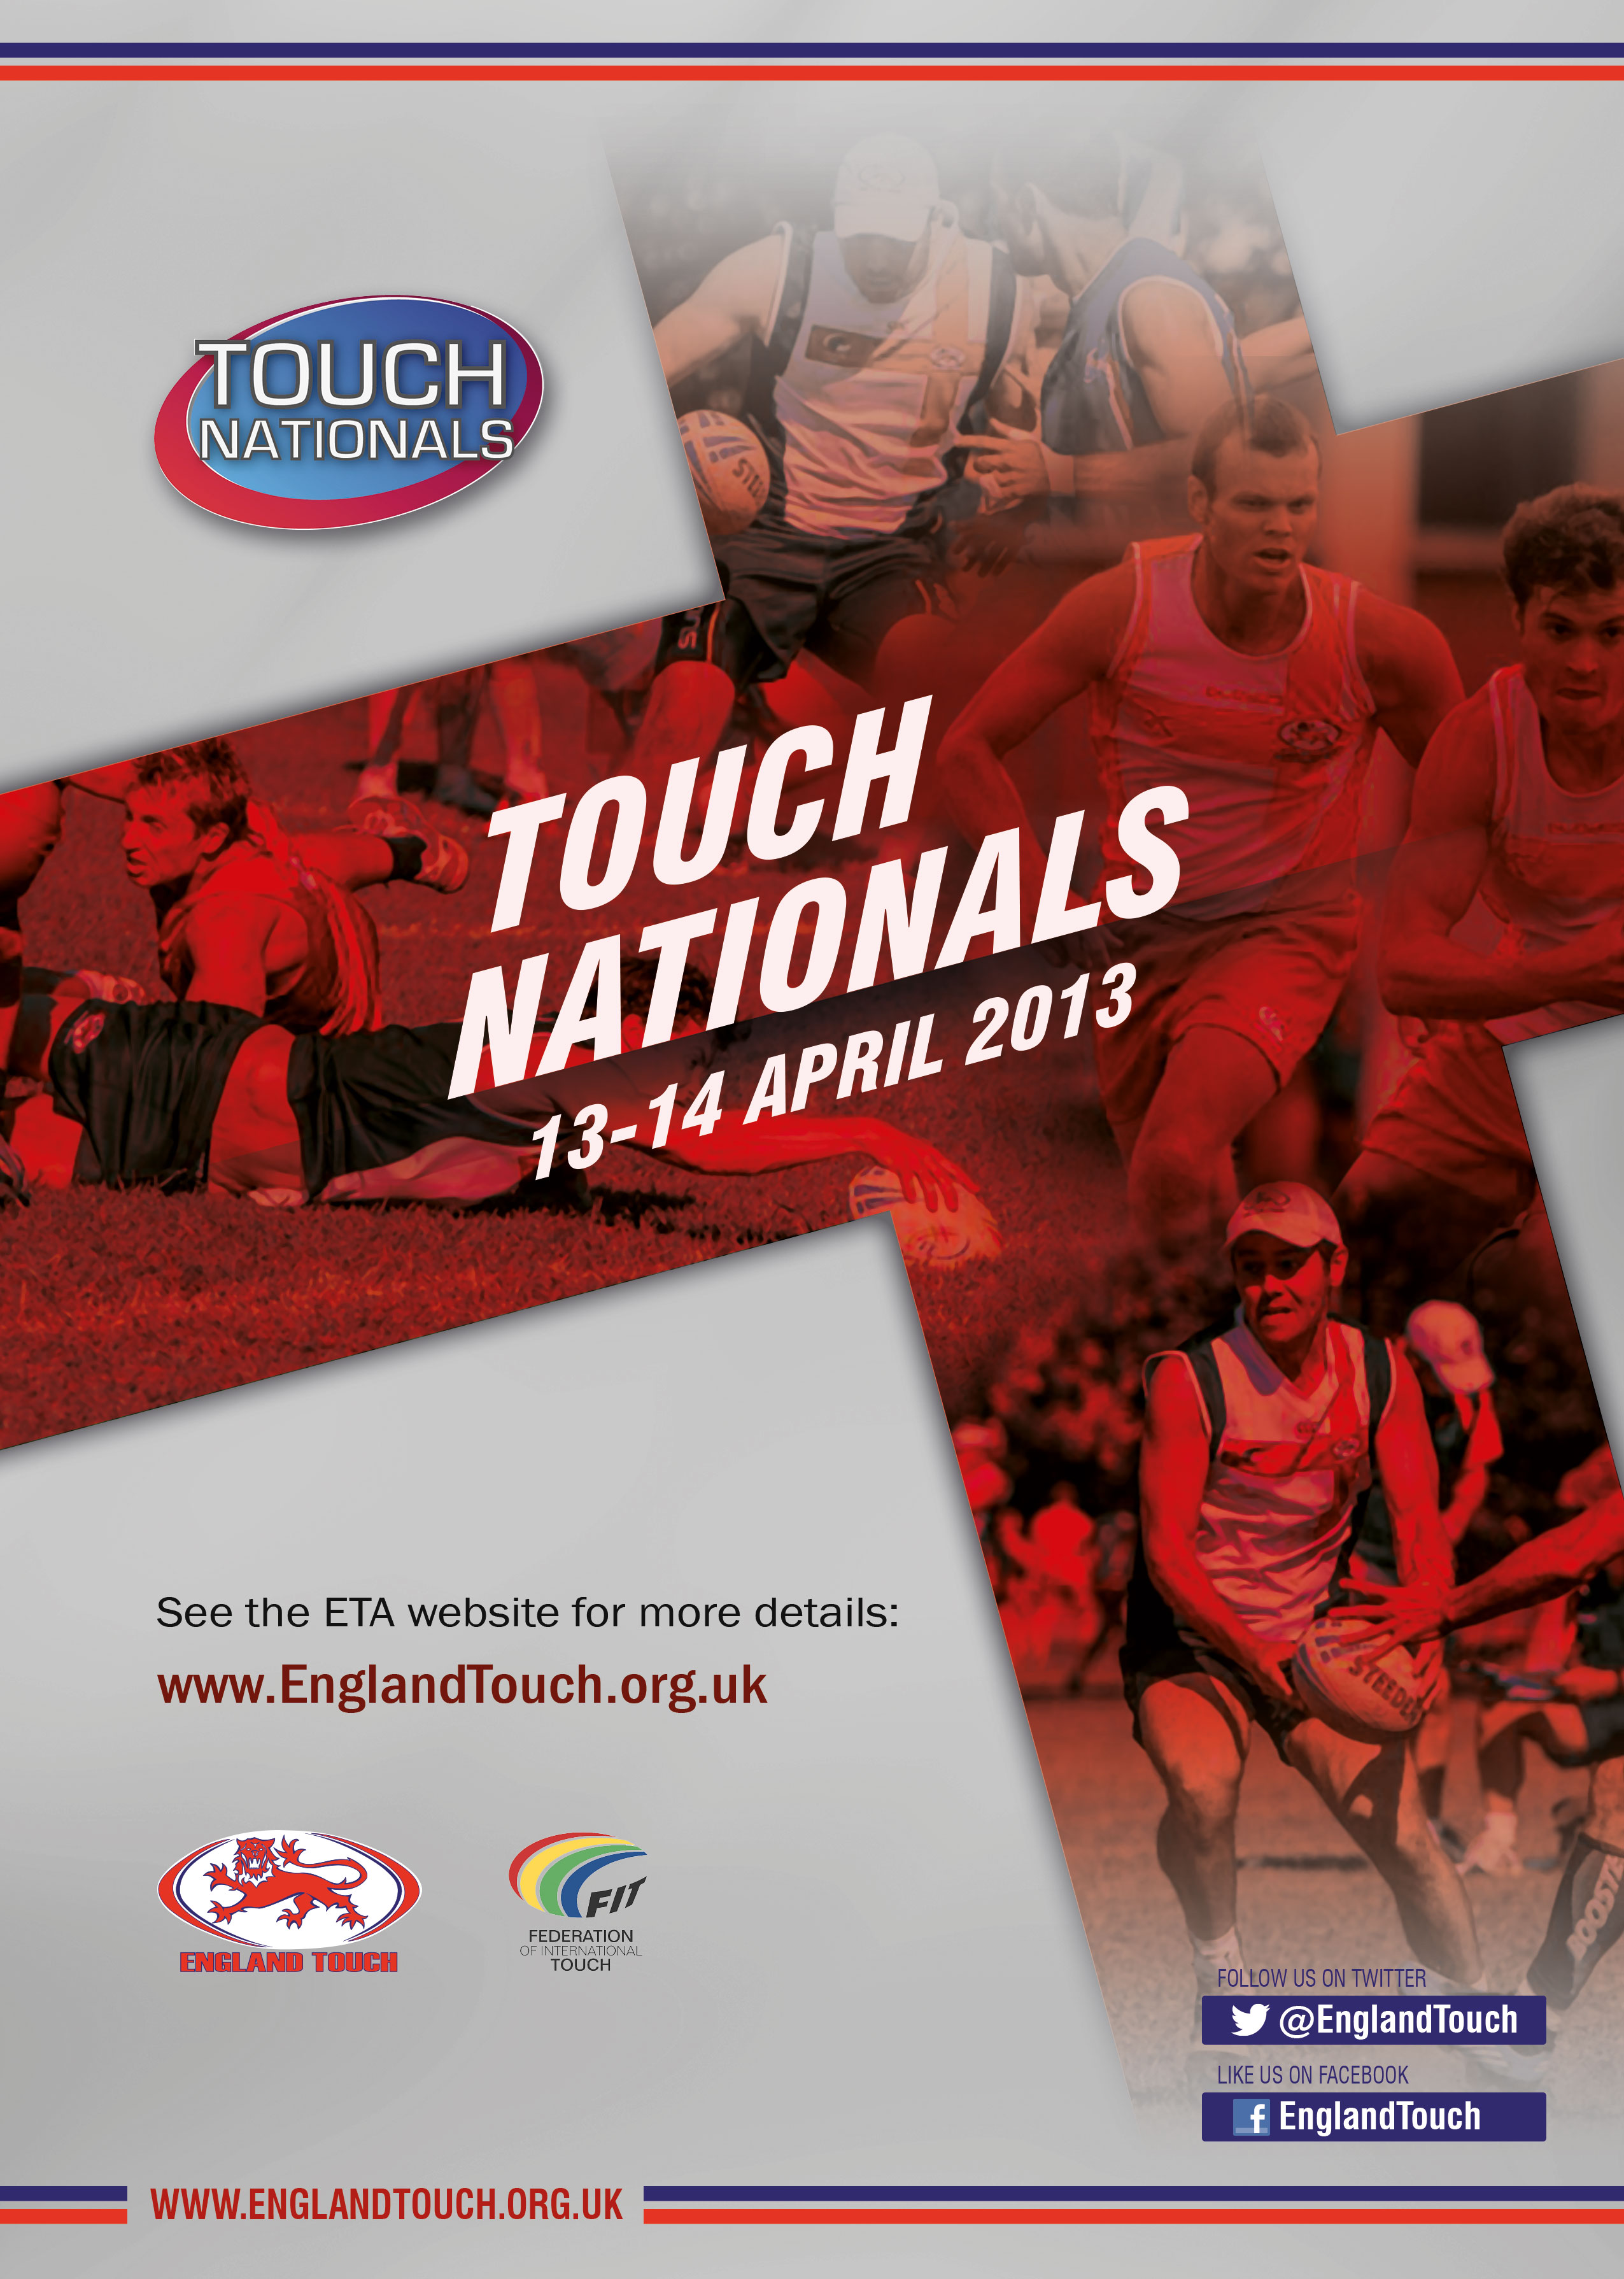 The Nationals - Launch for 2013